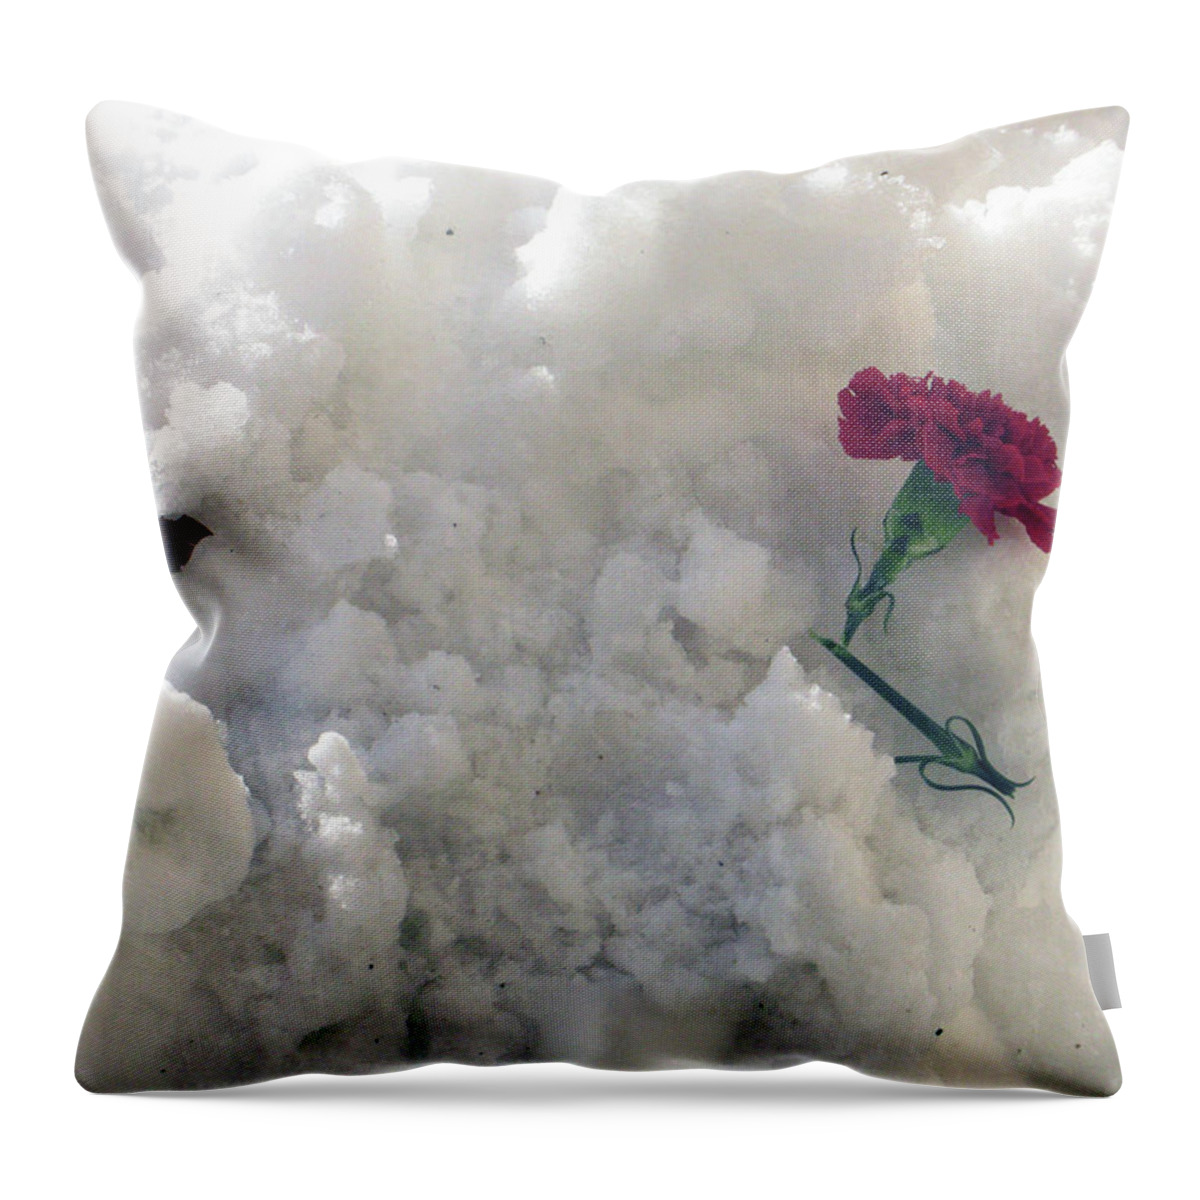 Promise Throw Pillow featuring the photograph Broken Promise by Wanda Brandon